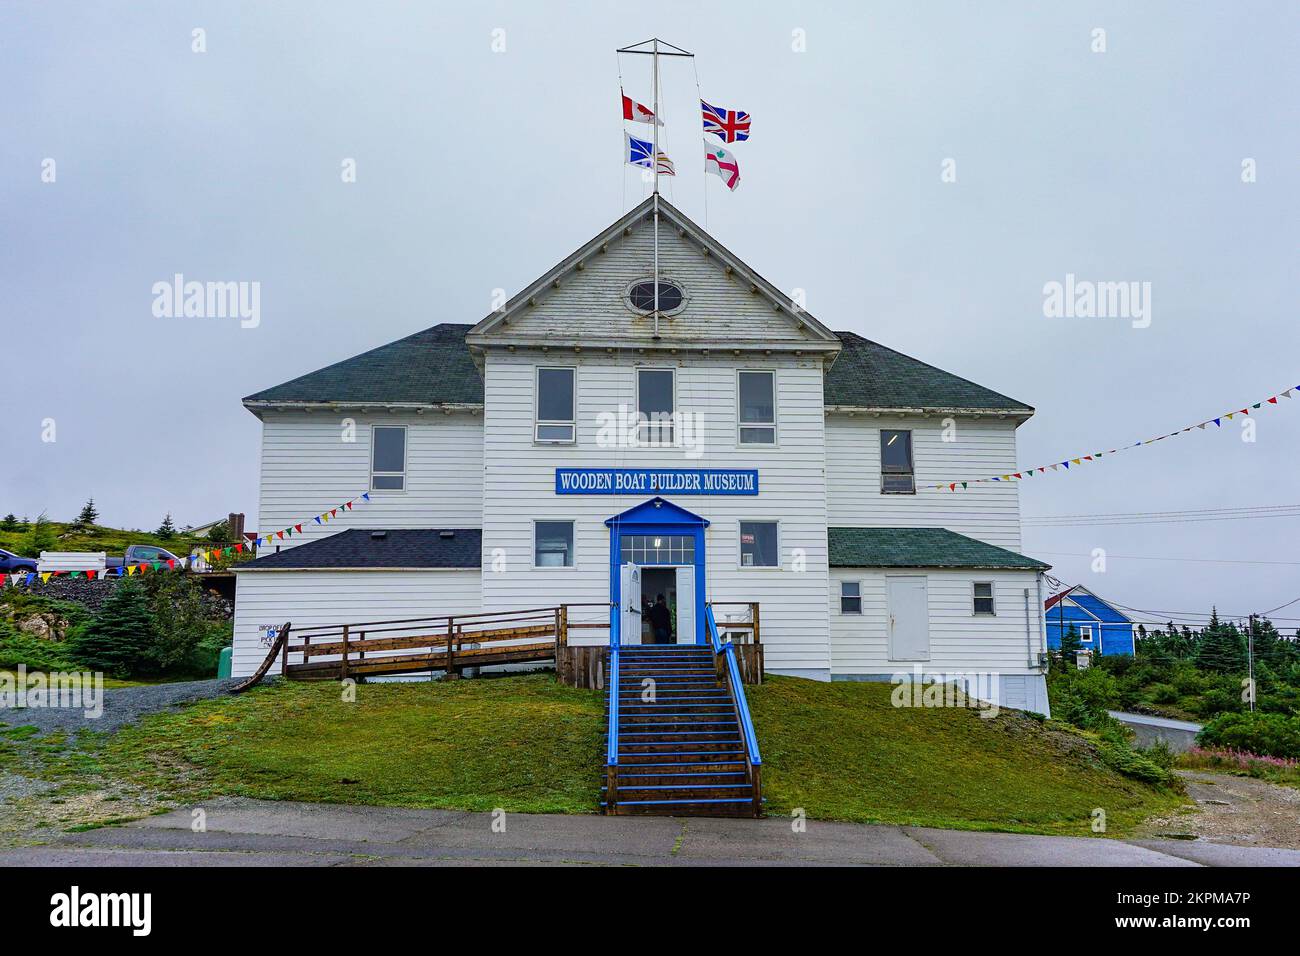 Twillingate, Newfoundland, Canada: Wooden Boat Builder Museum and Workshop. Stock Photo